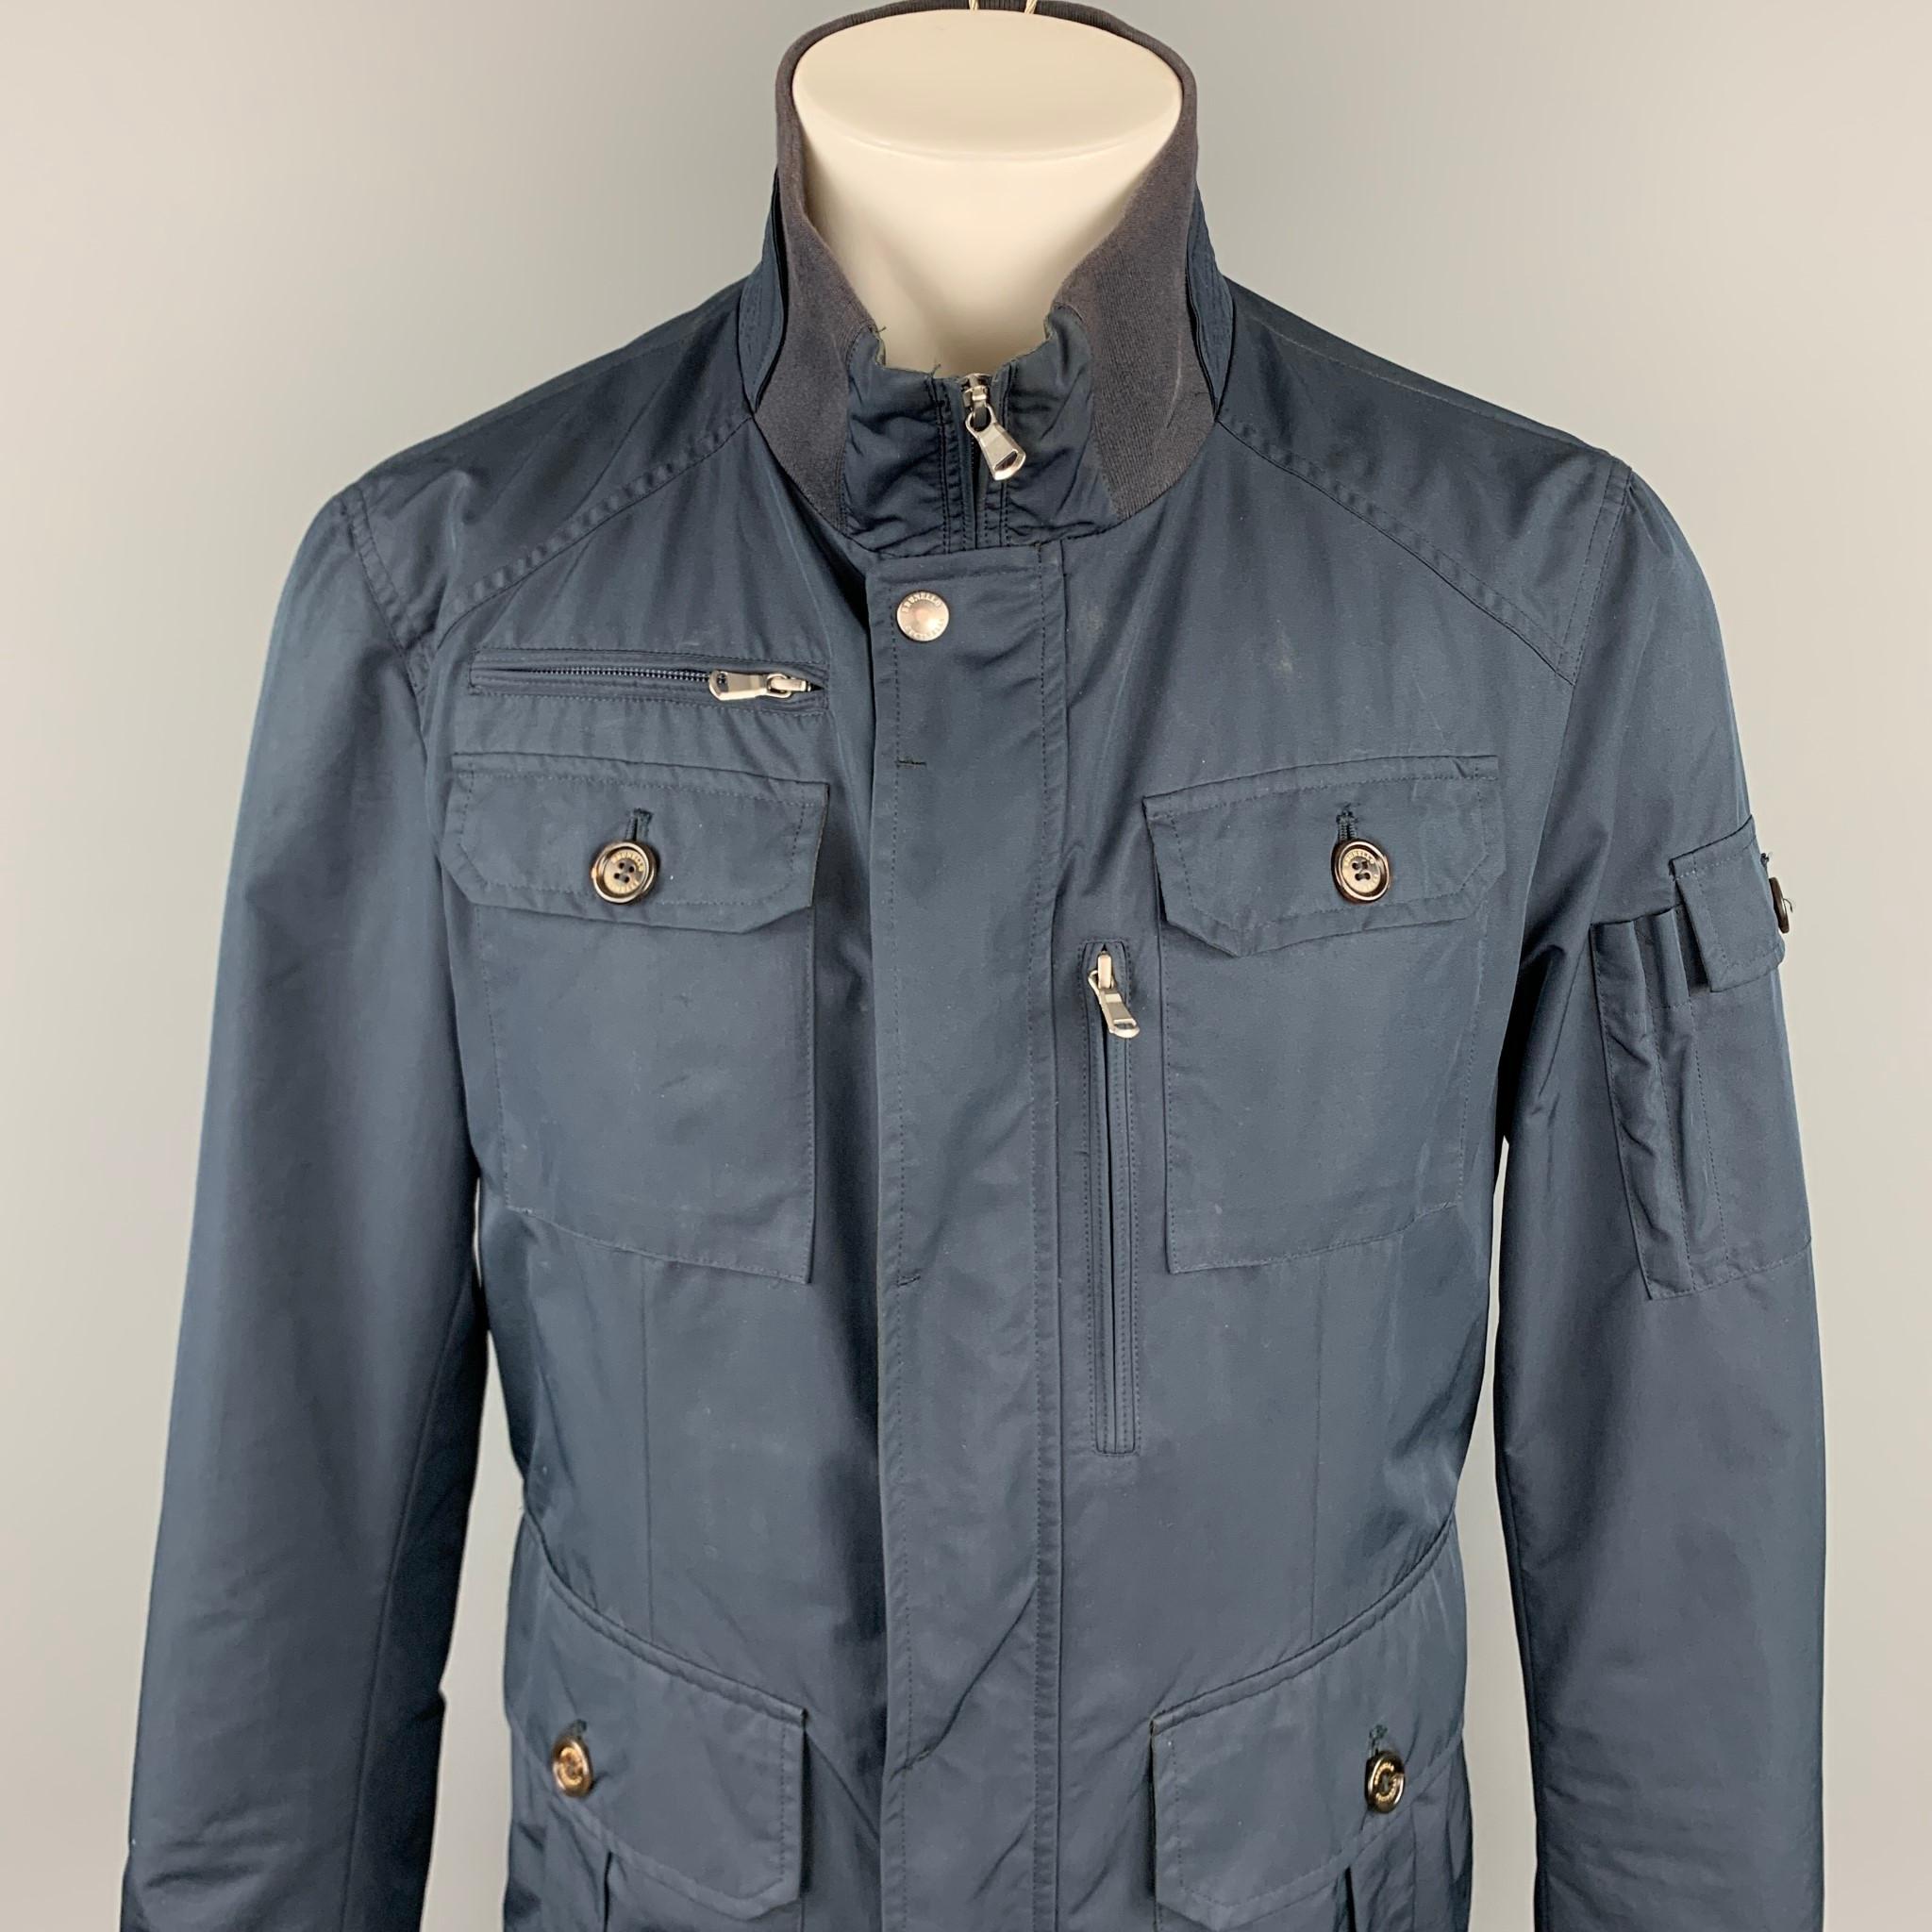 BRUNELLO CUCINELLI jacket comes in a navy nylon featuring a ribbed high collar, patch pockets, sleeve pocket, and a buttoned & zip up closure. Made in Italy.

Excellent Pre-Owned Condition.
Marked: M
Original Retail Price: